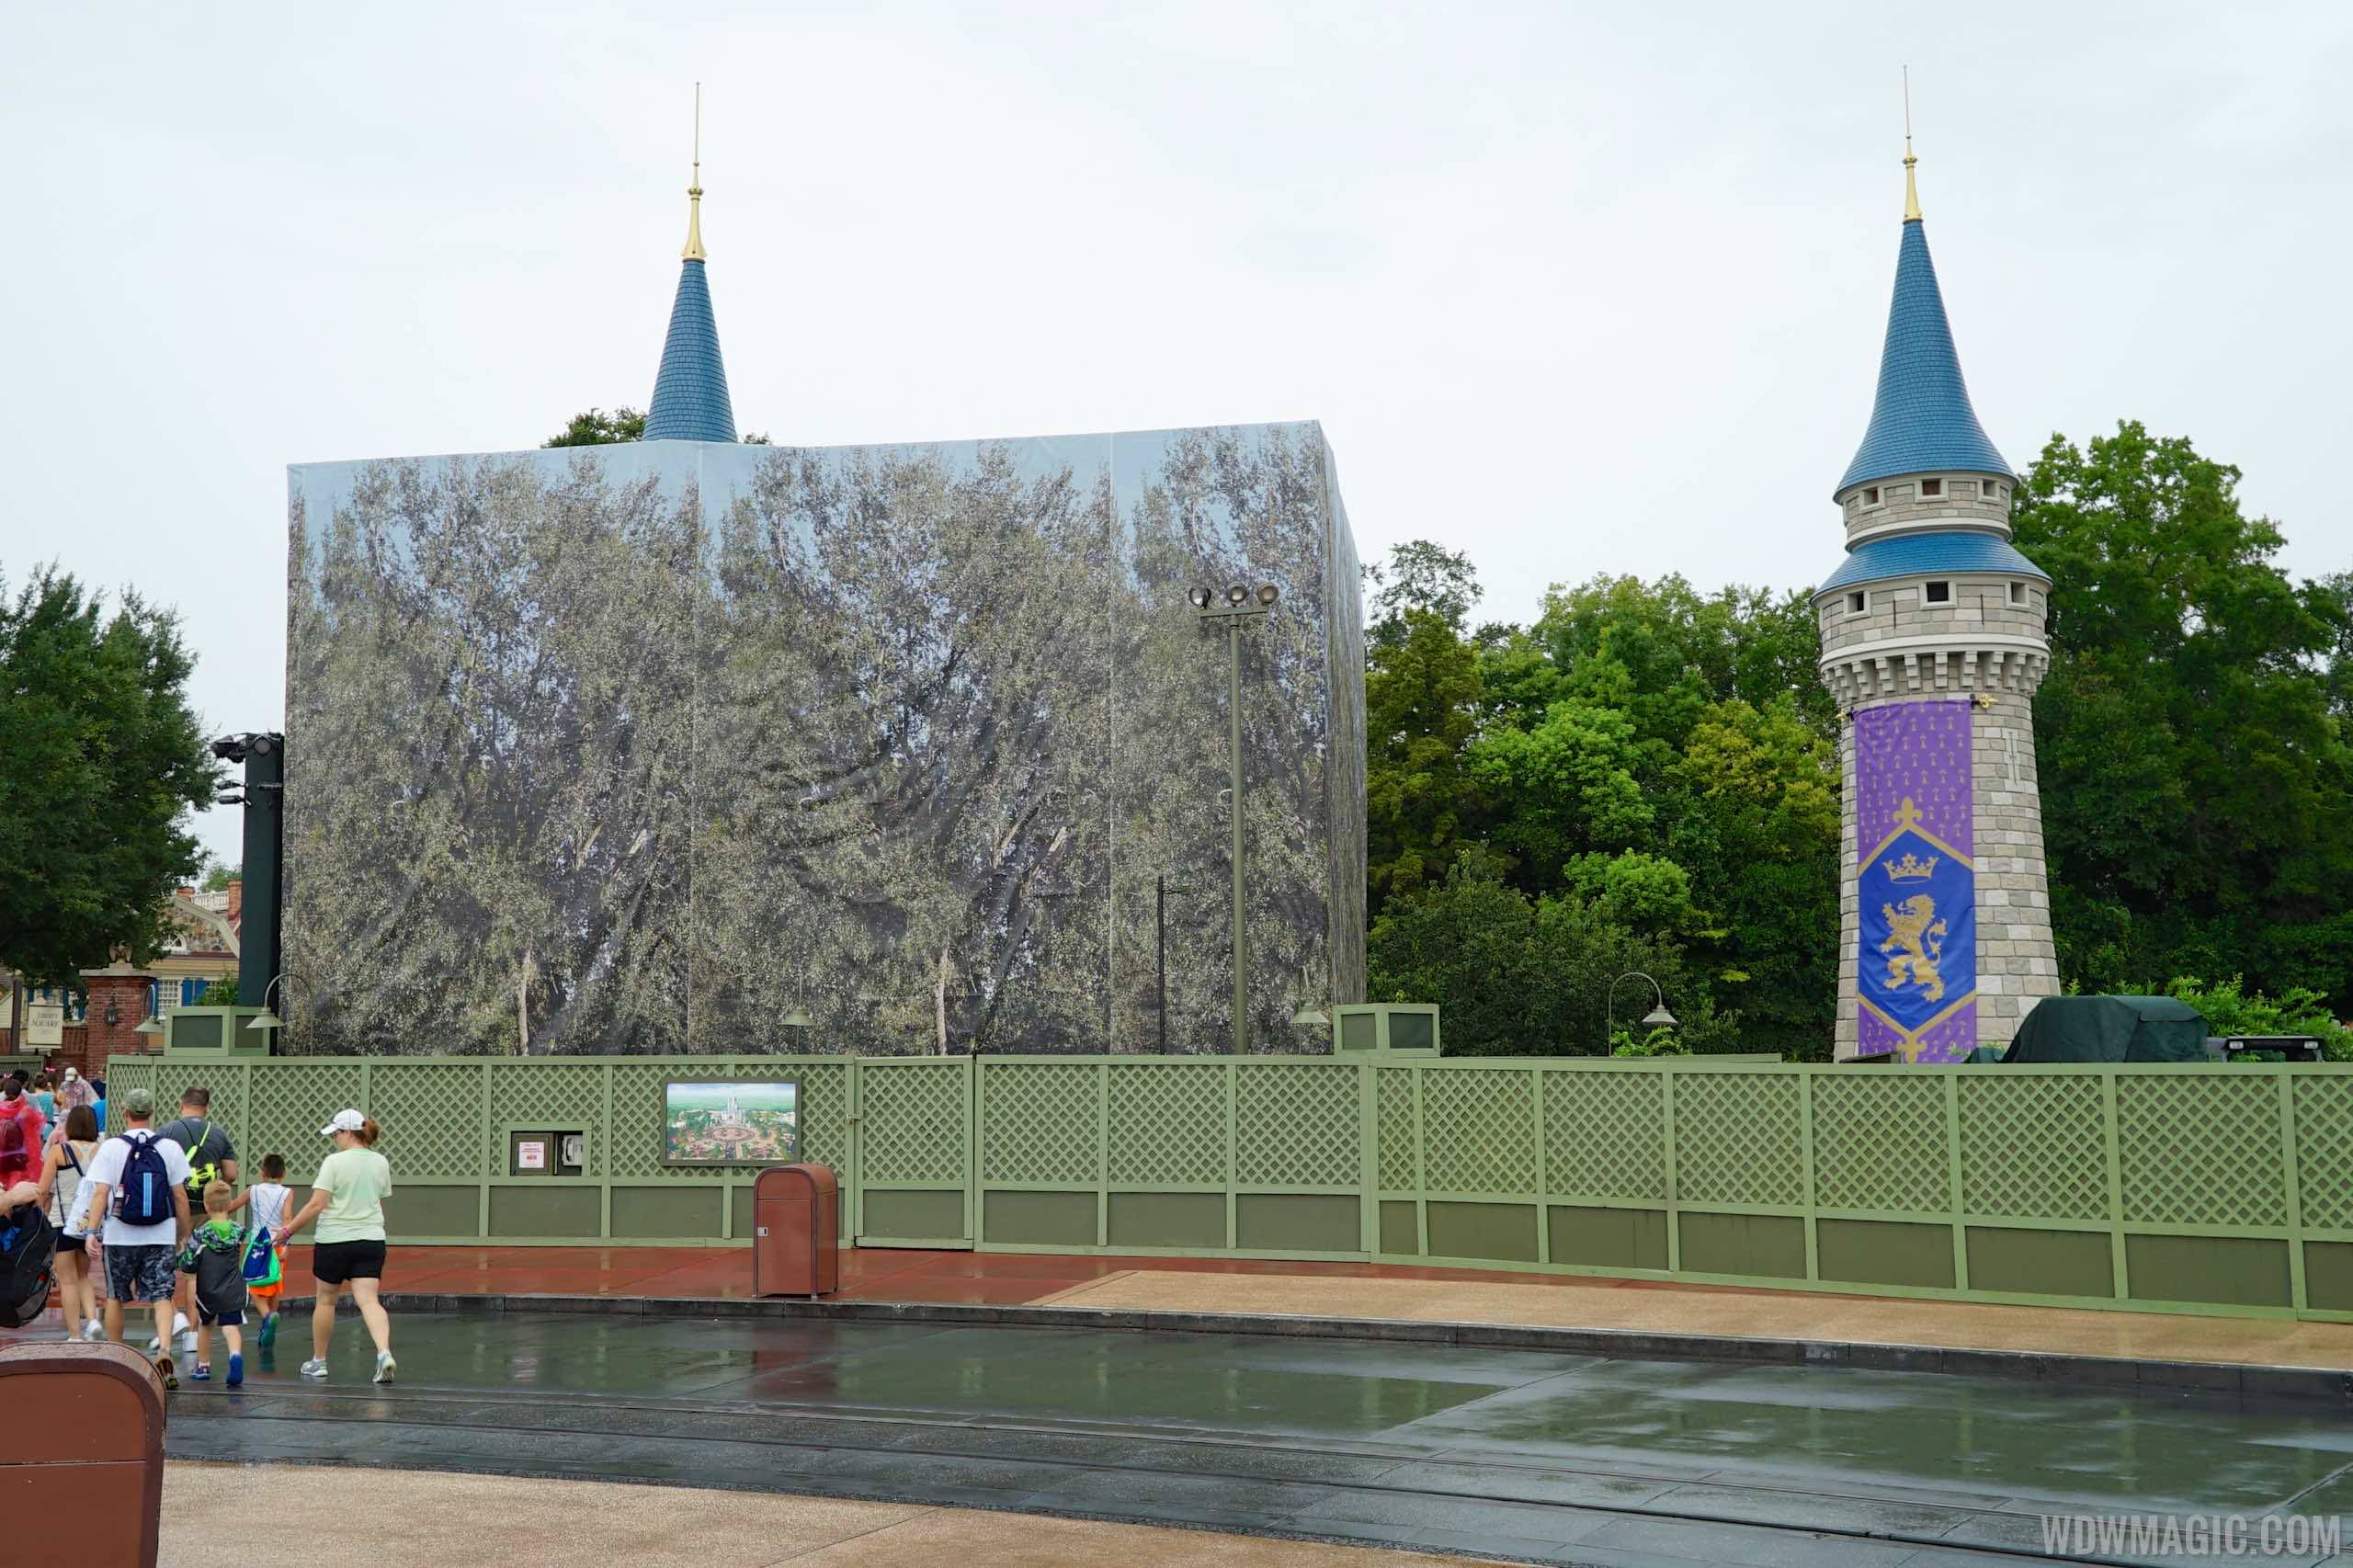 PHOTOS - Latest look at the Cinderella Castle additions and refurbishment in the Magic Kingdom